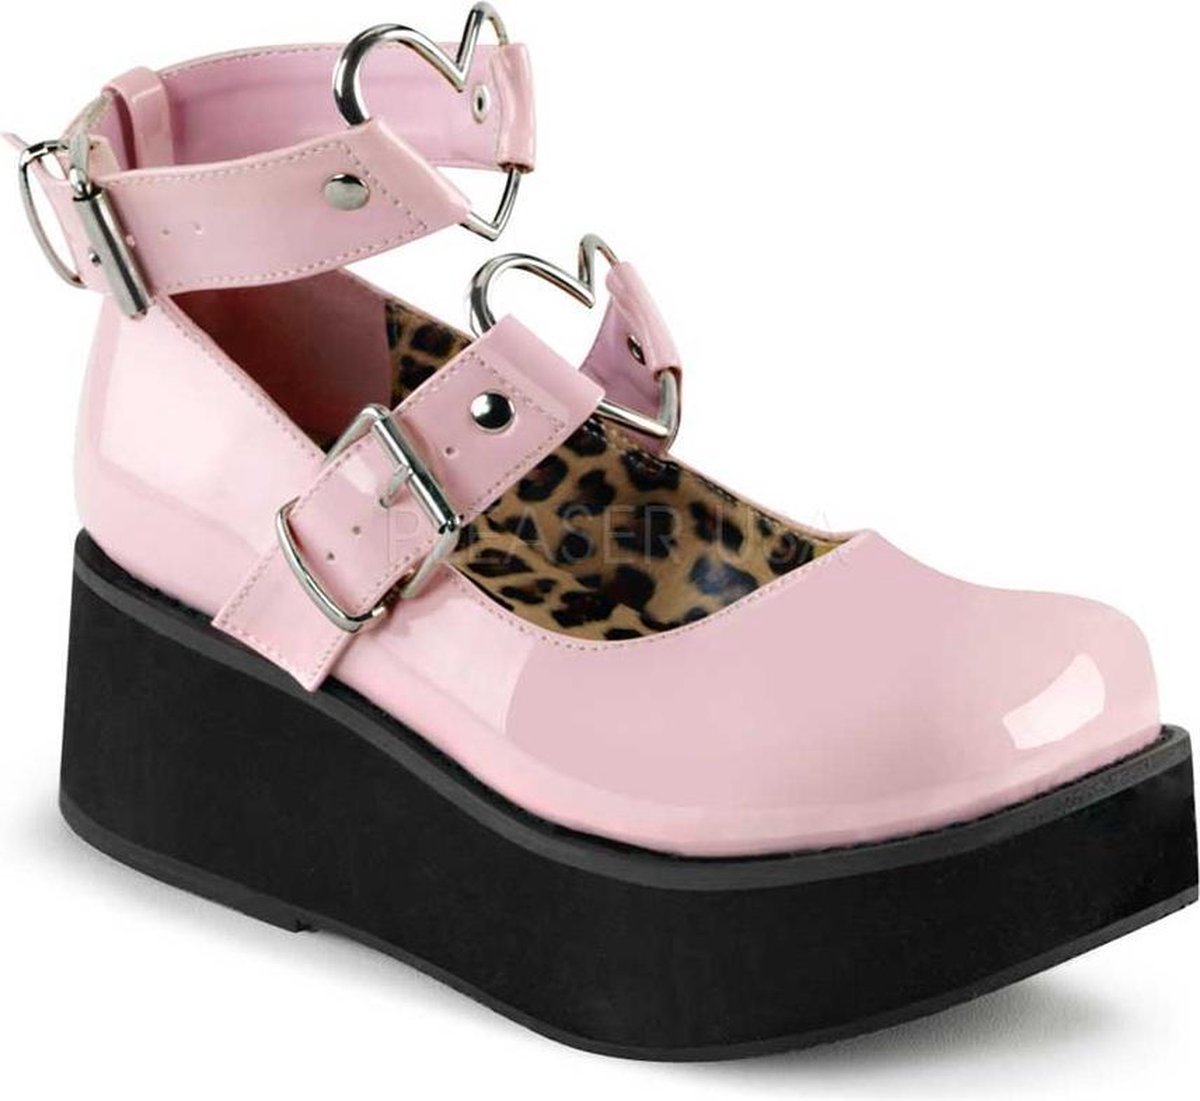 DemoniaCult Sprite-02 shoe with ankle straps buckles and metal heart rings patent pink Demonia